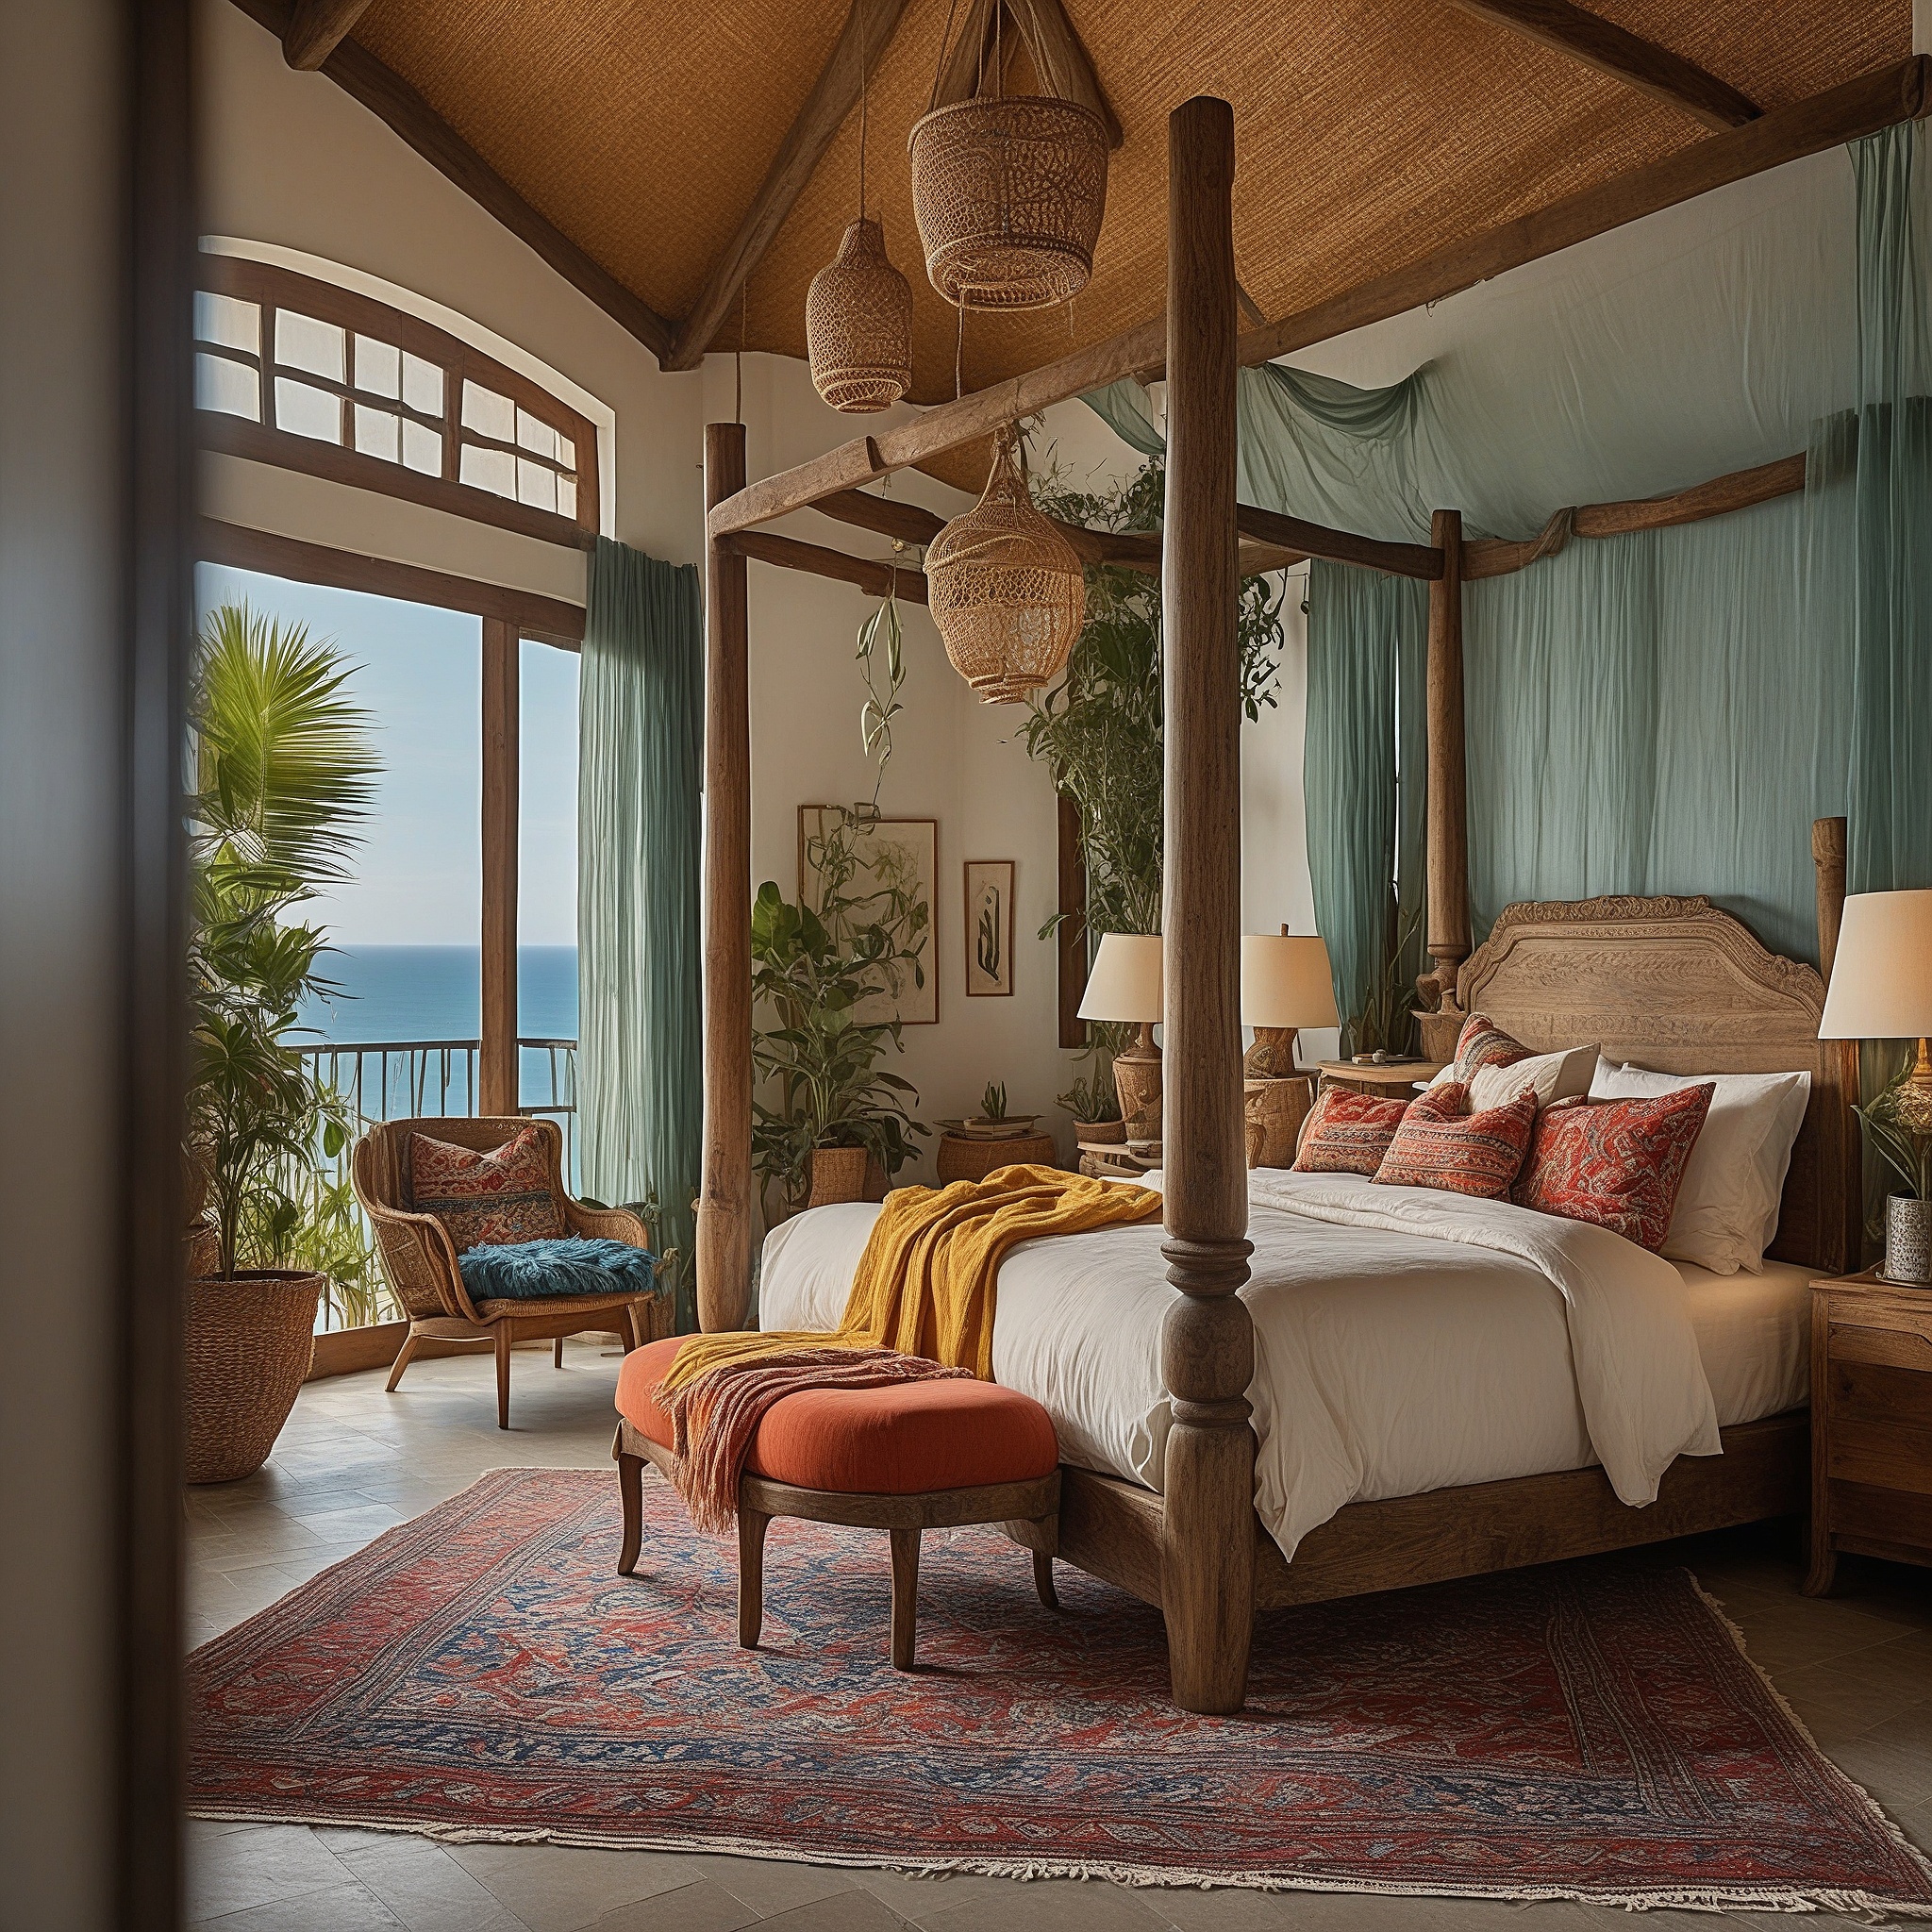 Bohemian Luxury Master Bedroom With Colorful Textiles, Eclectic Furniture, Canopy Bed